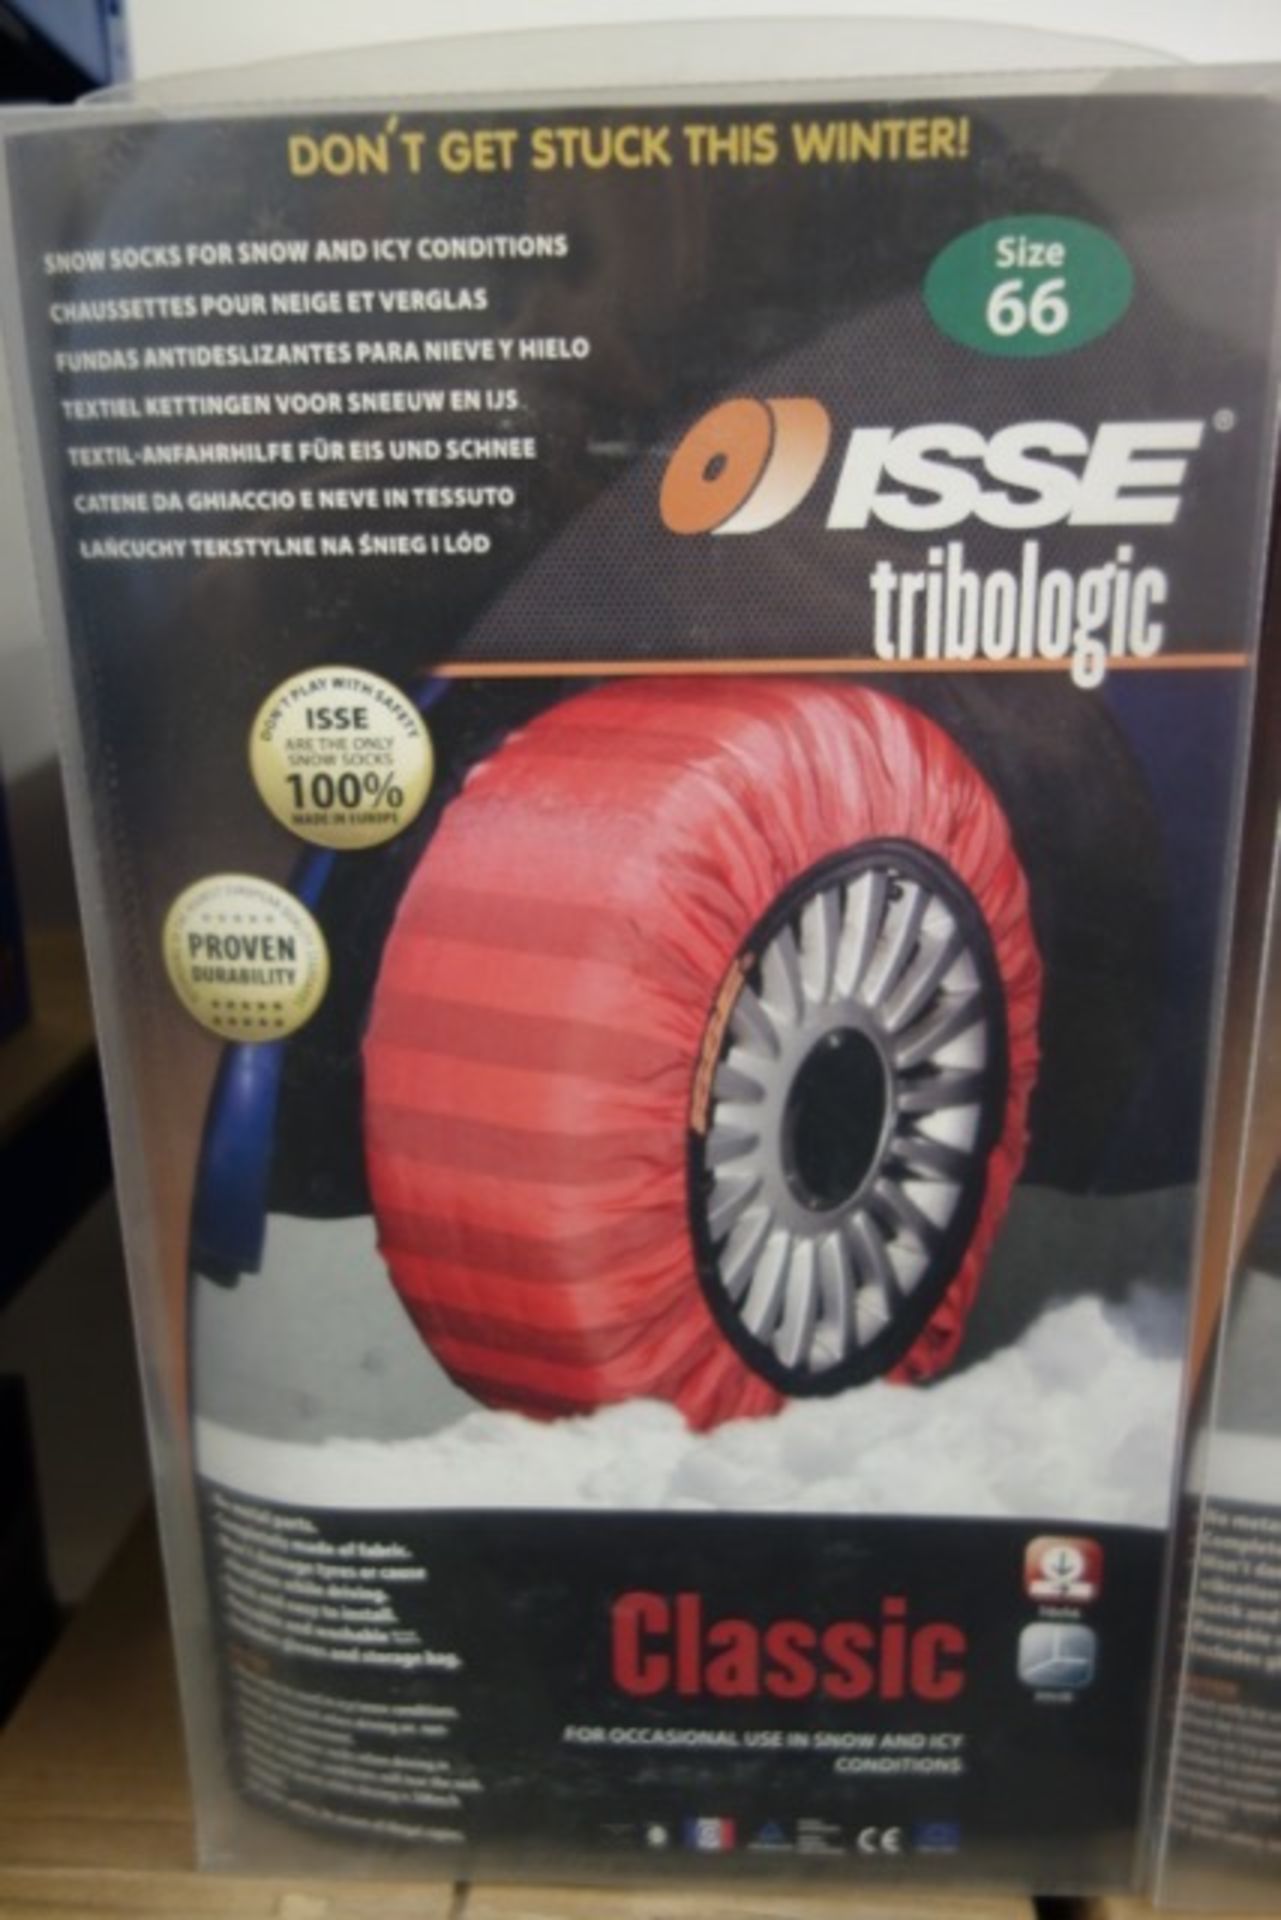 15 x Brand New Sets of Isse Tribologic Classic Snow Tyre Socks for Snow & Icy Conditions. You will - Image 2 of 3